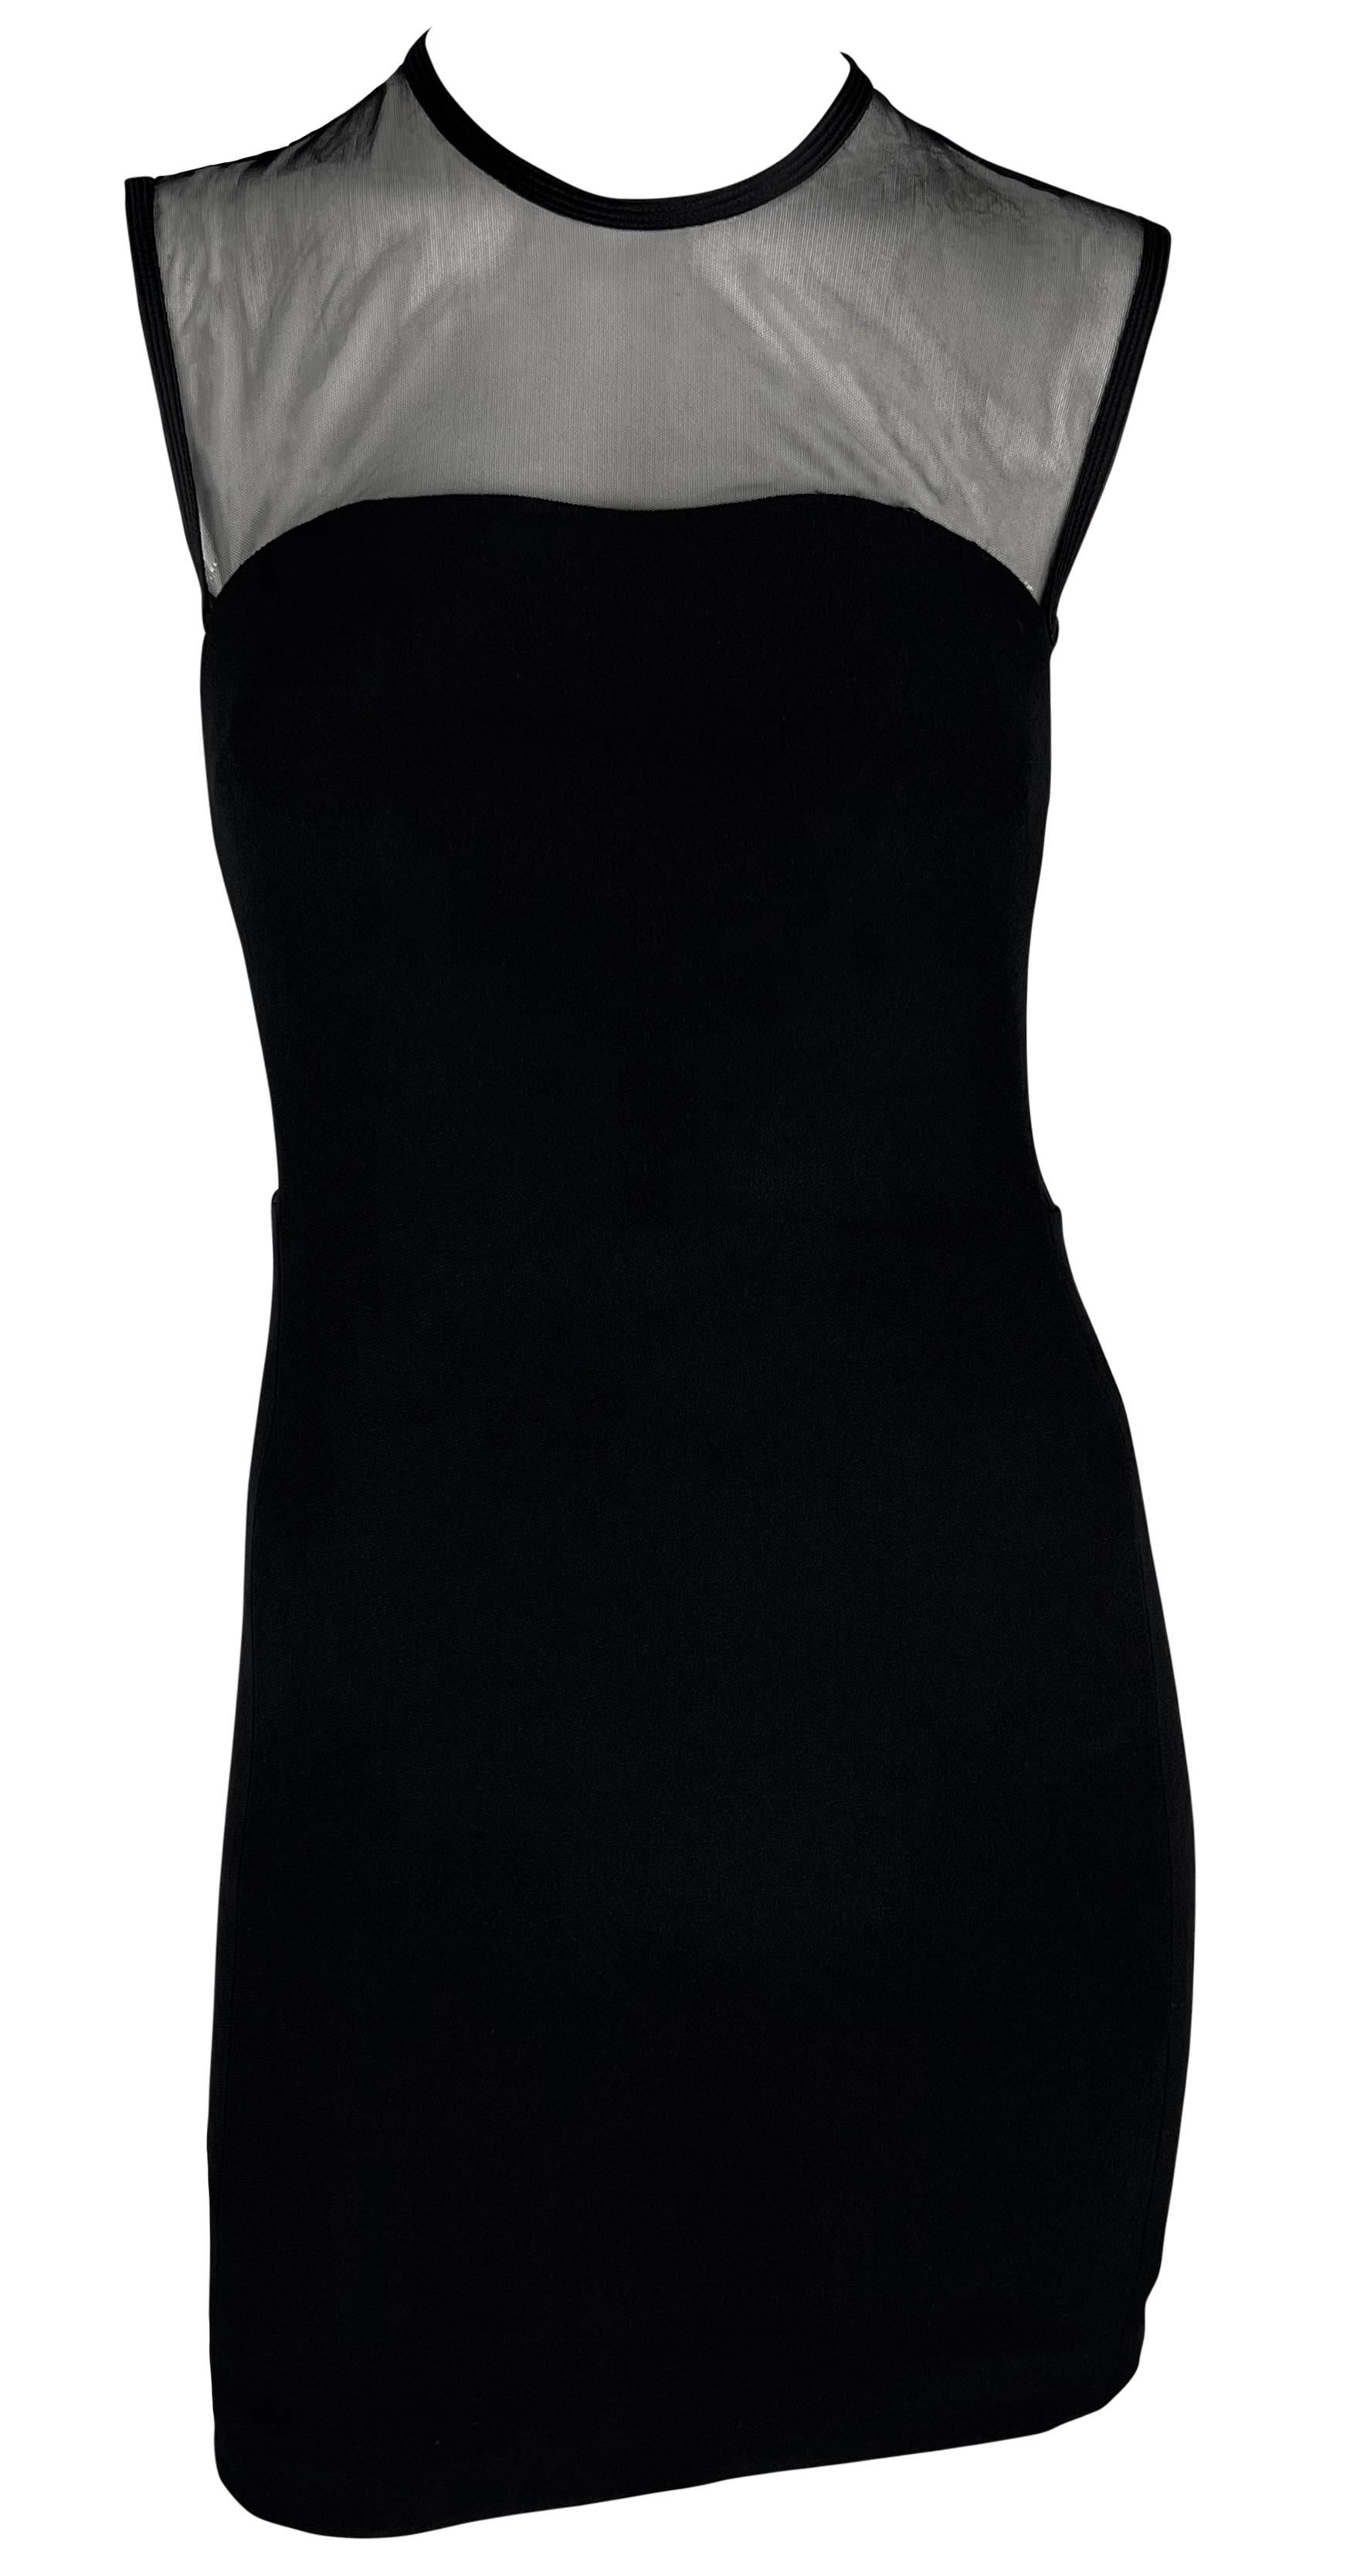 Gianni Versace designed this black mod mini dress for his  Spring/Summer 1996 Gianni Versace collection. This fabulous short dress features a mesh detail above that extends under each arm and to the upper back. Classic yet sexy and chic, this mod